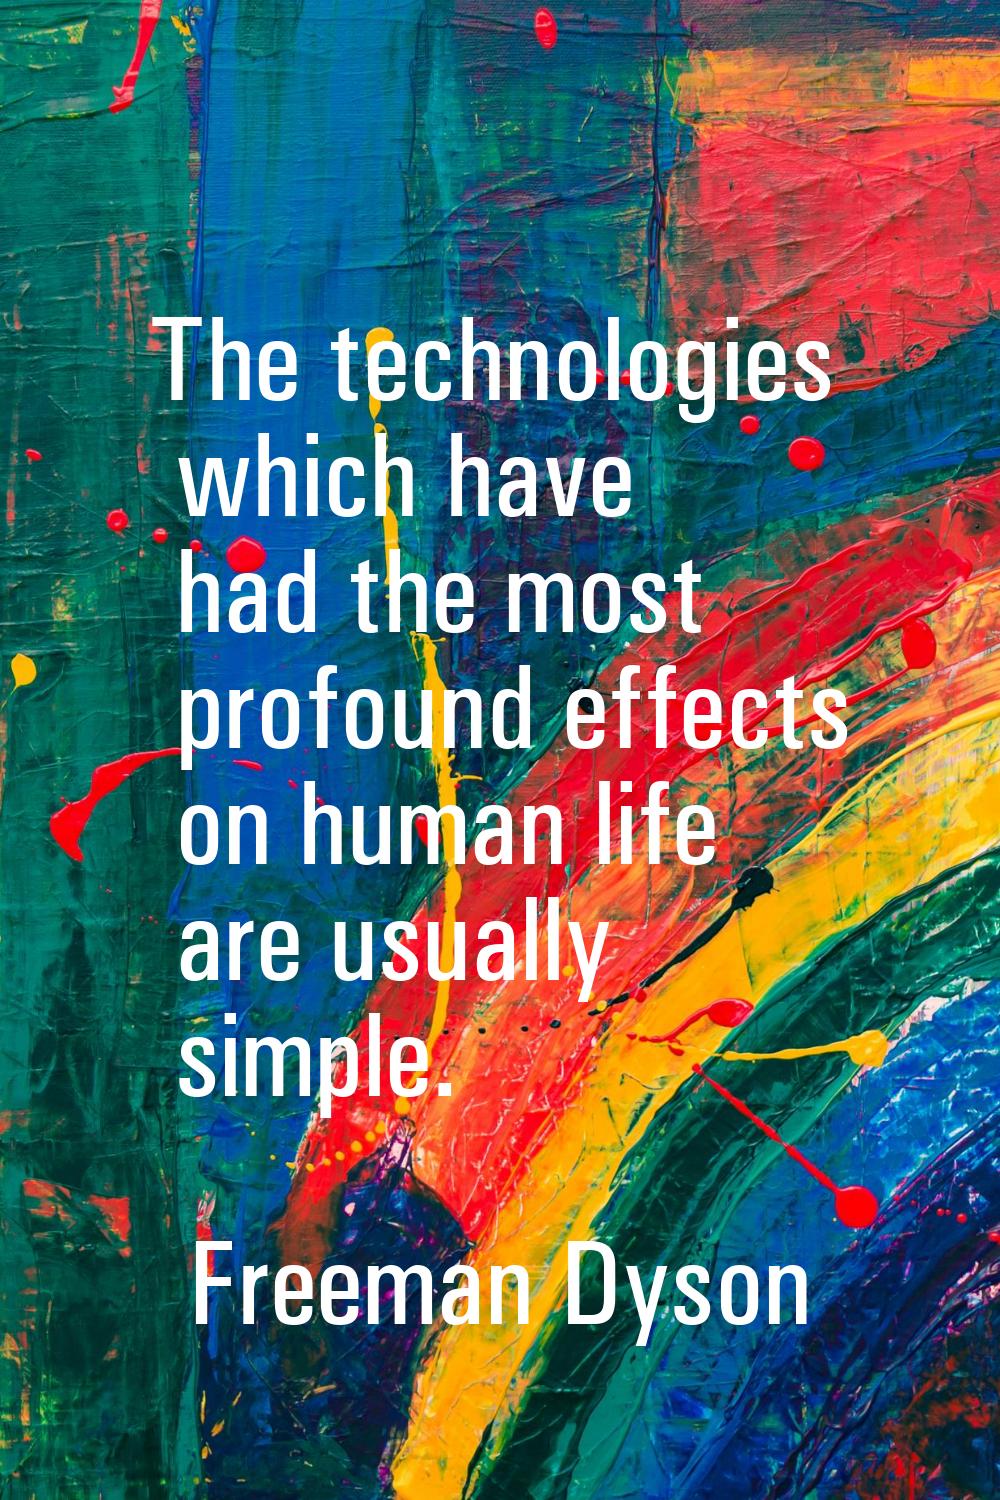 The technologies which have had the most profound effects on human life are usually simple.